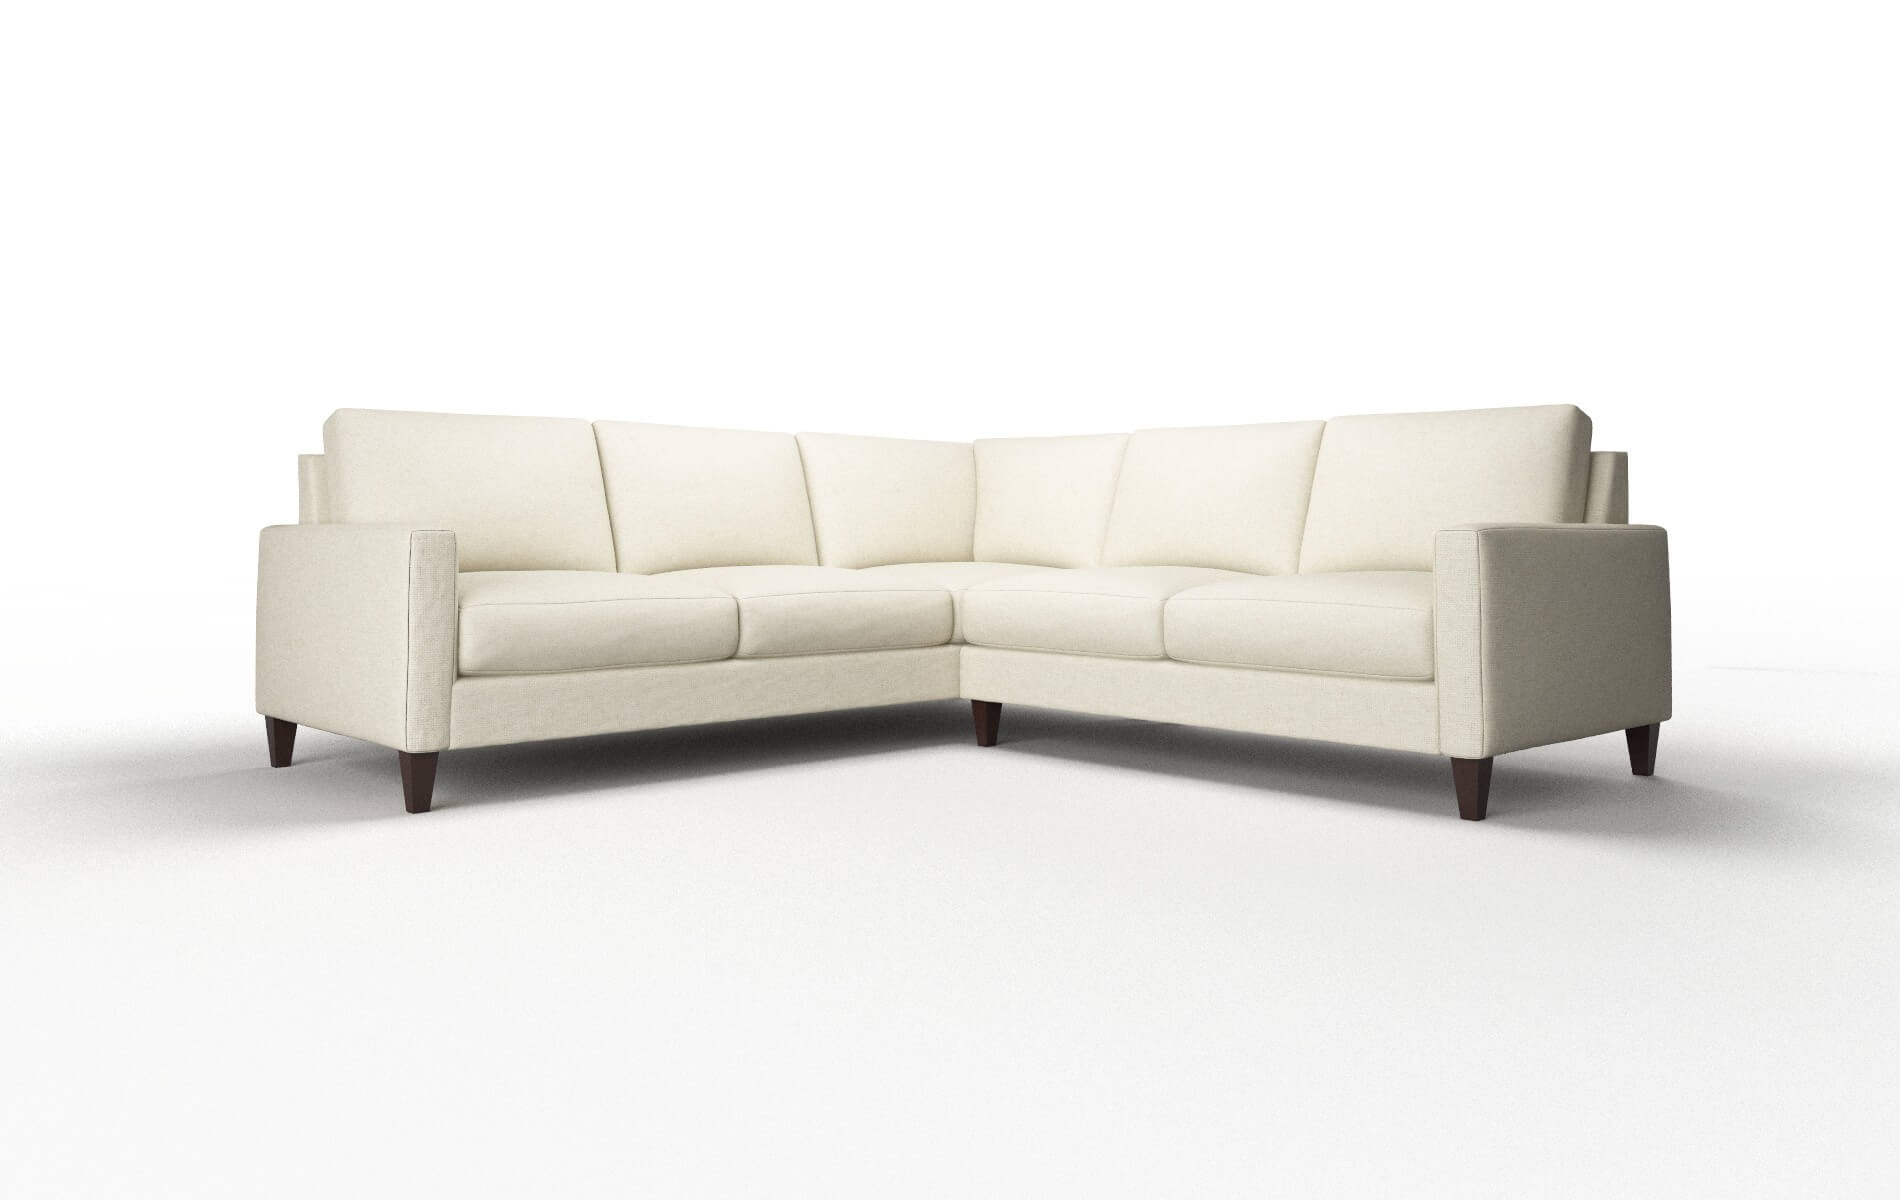 Cannes Redondo Oyster Sectional espresso legs